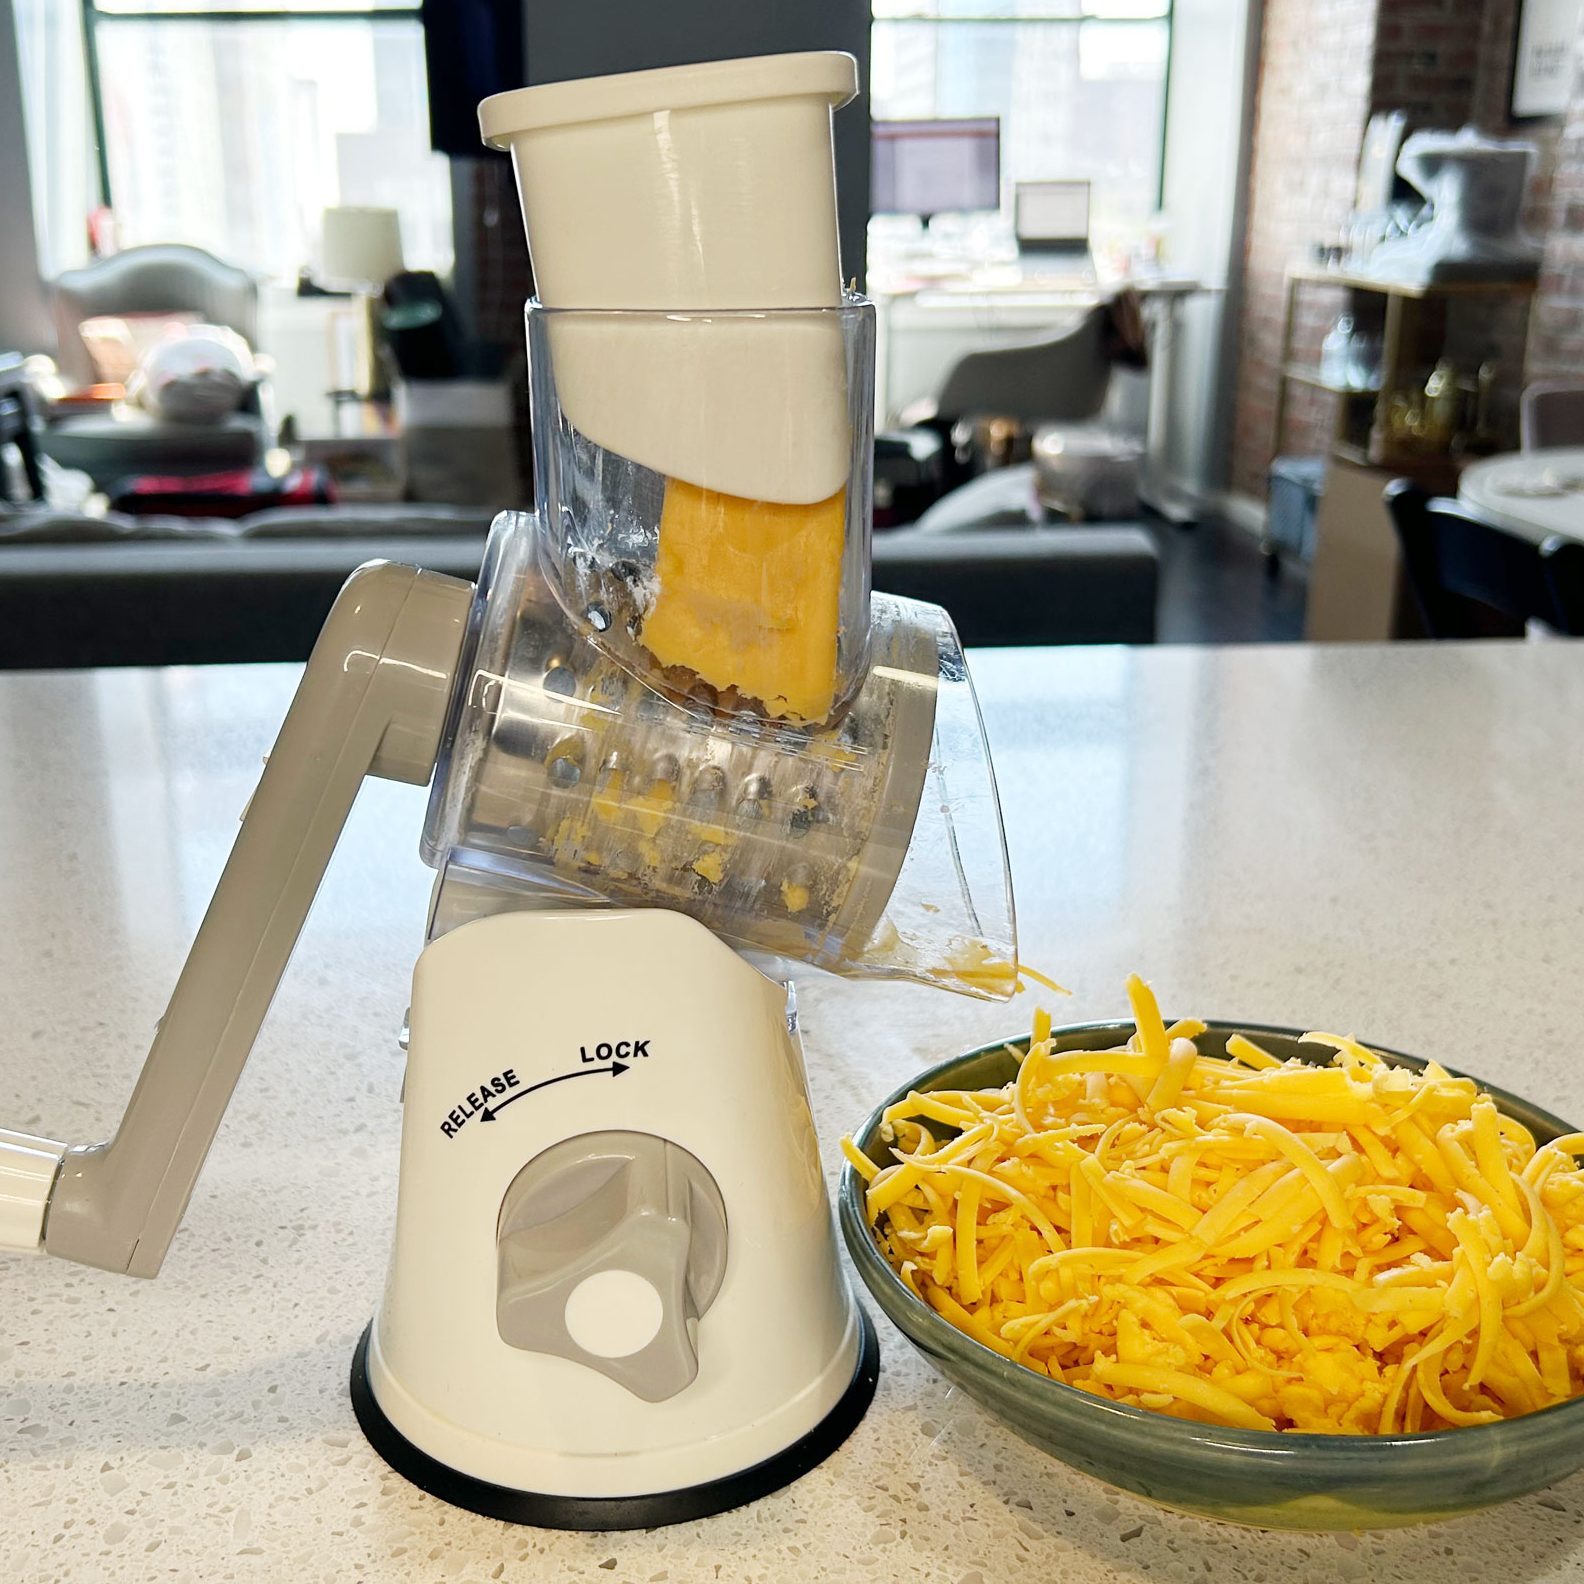 Top 5: Best Rotary Cheese Grater in 2023 